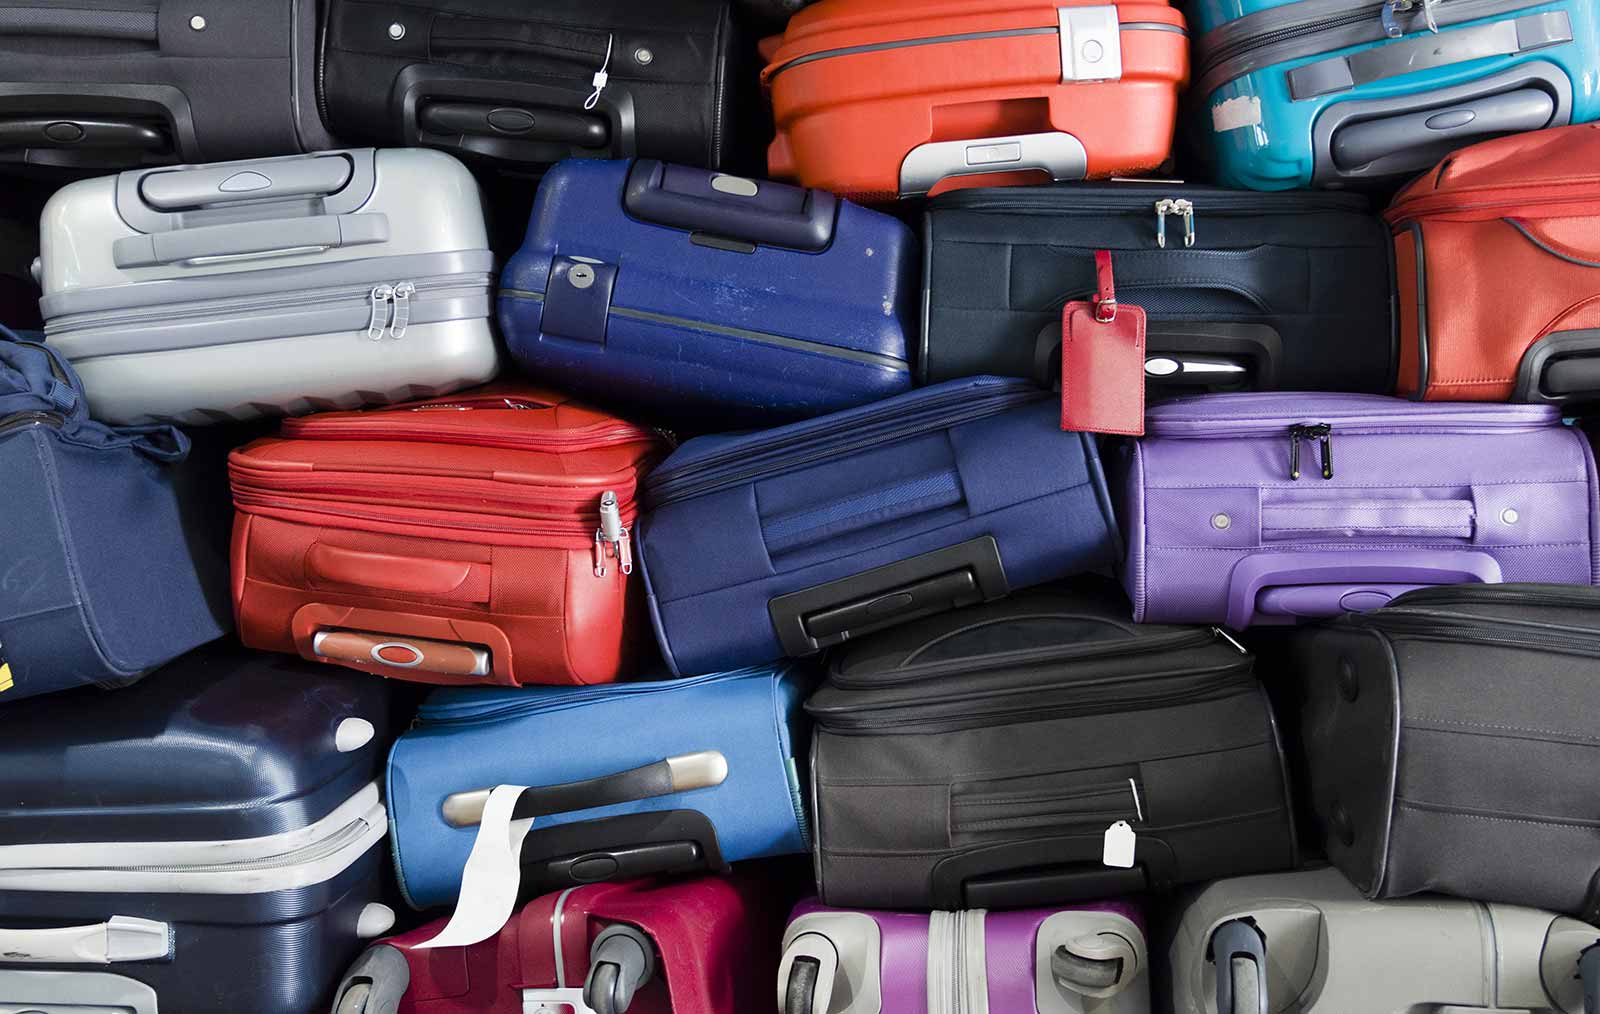 Luggage Tax Creates New Translation Opportunities